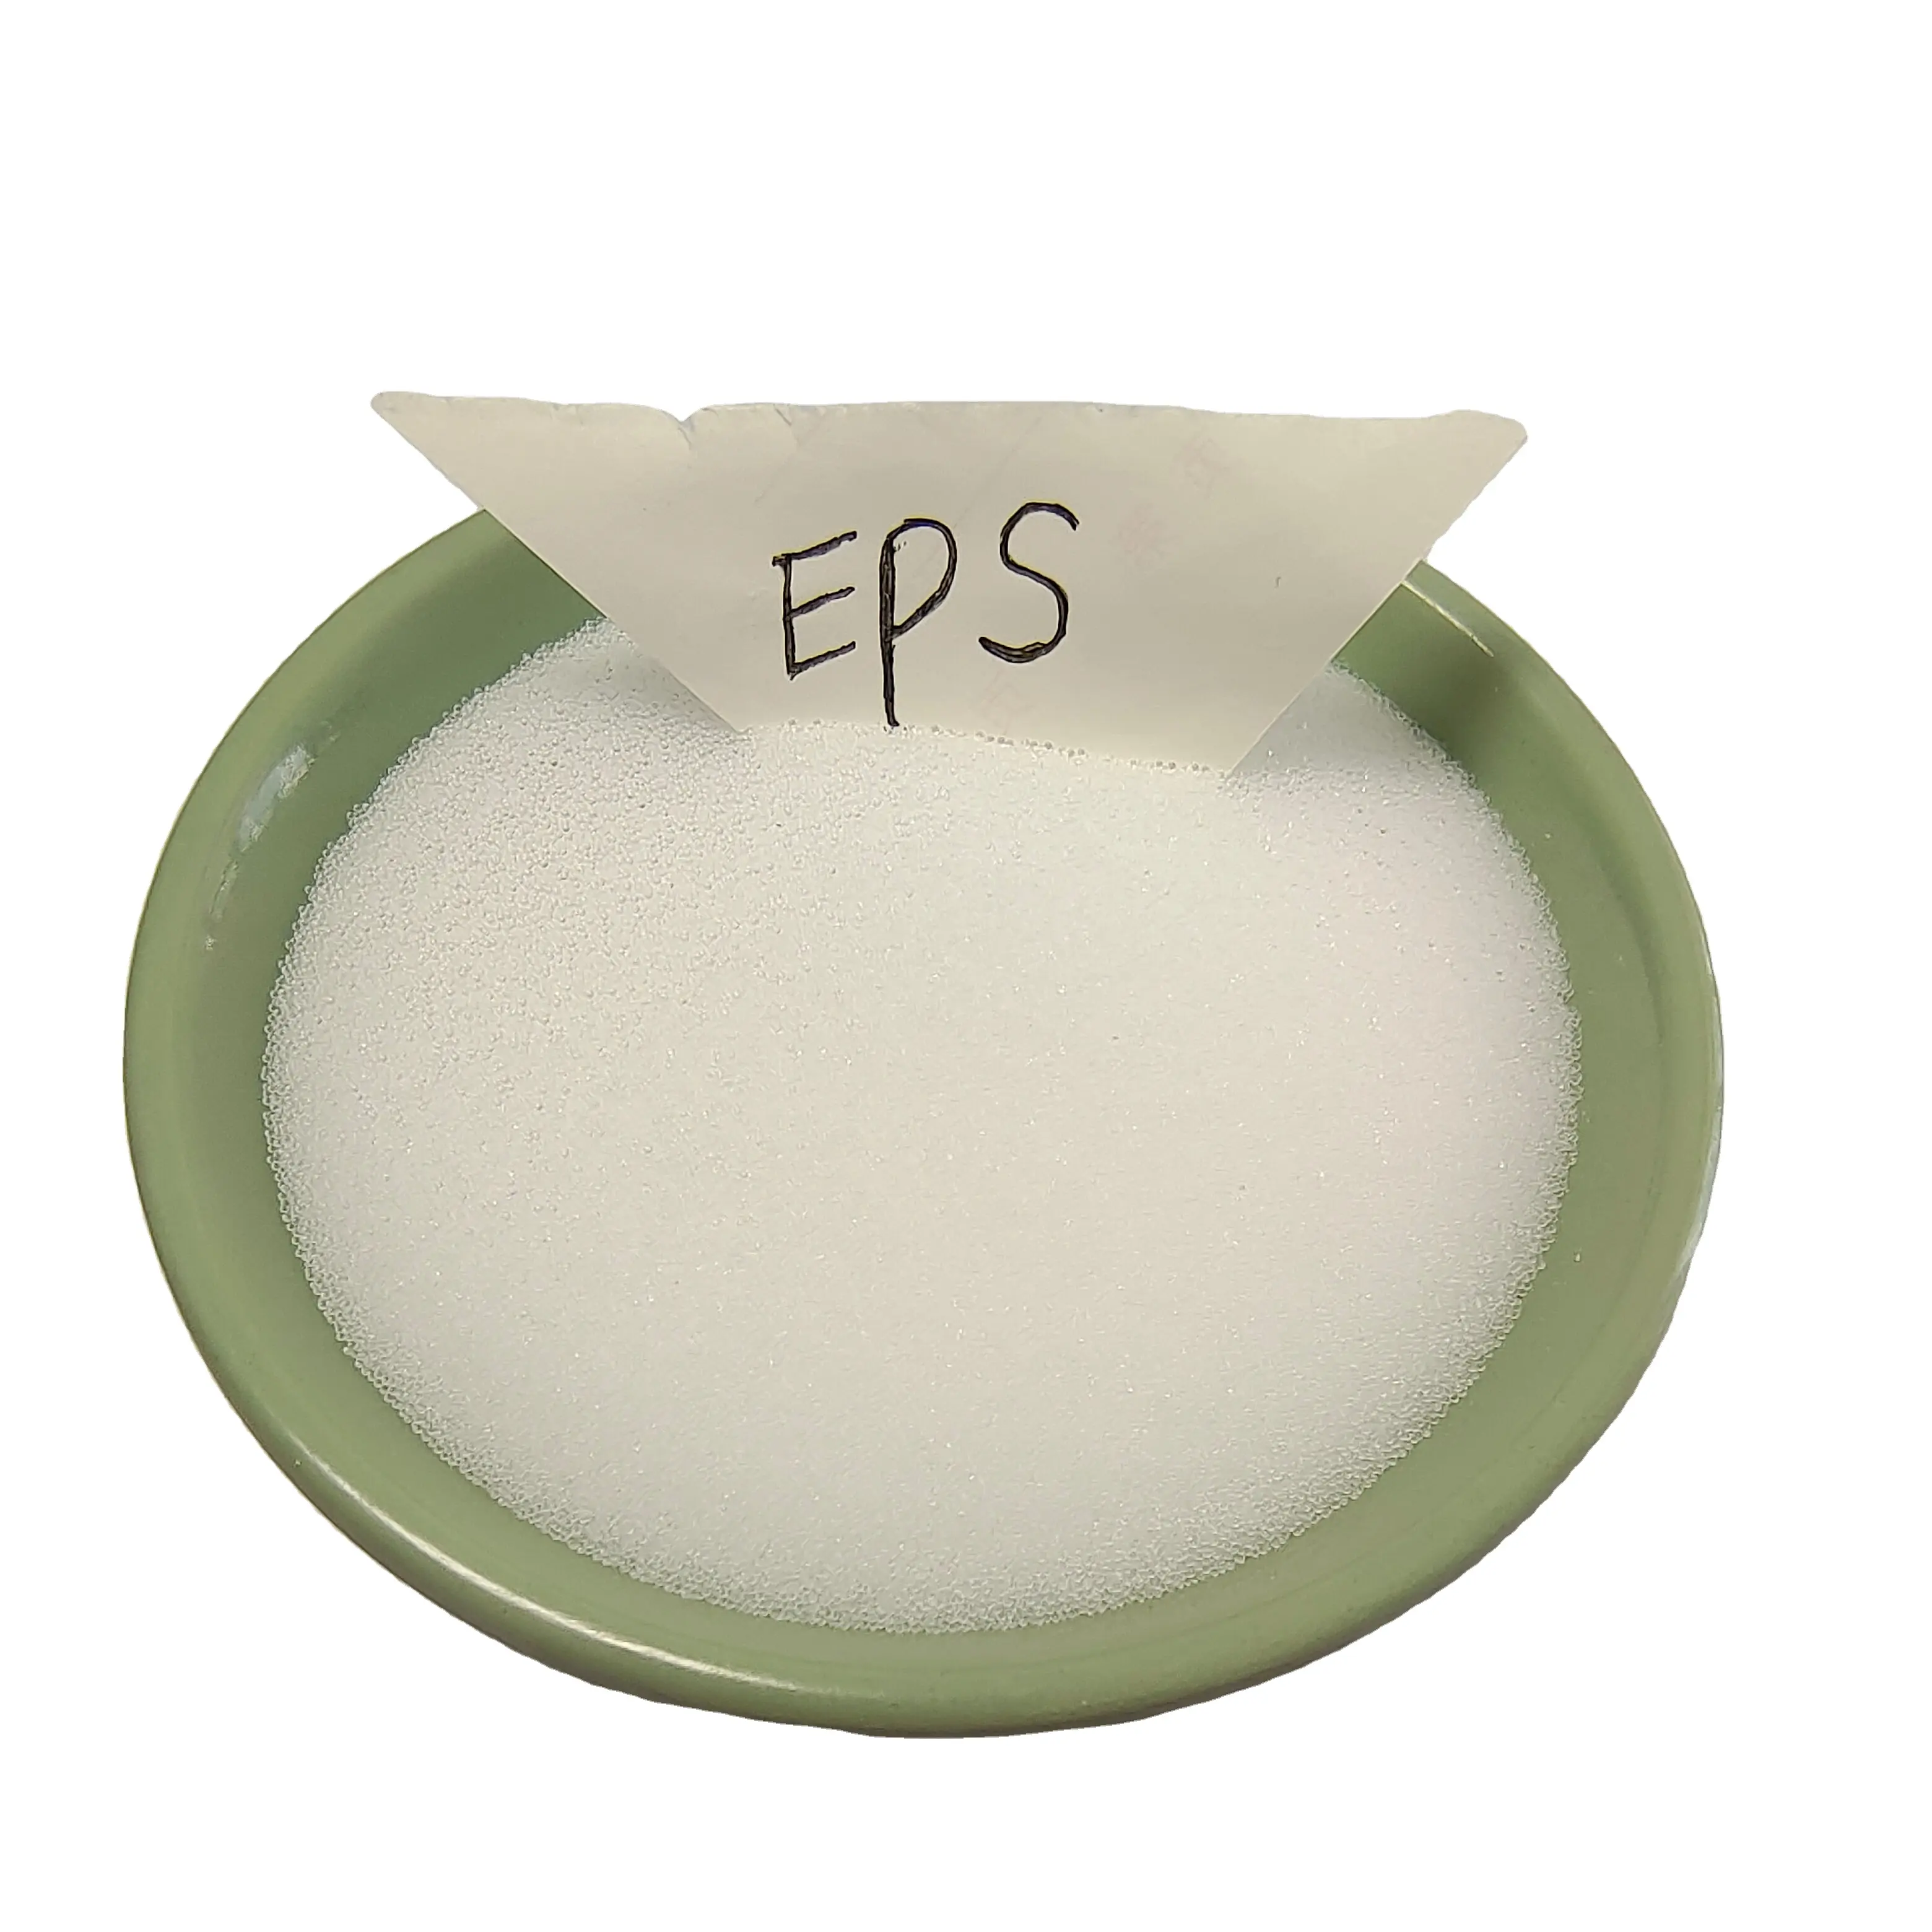 Top Grade EPS Expandable Polystyrene Eps Granules Thermocol Raw Material Granules Plastic Eps Expandable Polystyrene